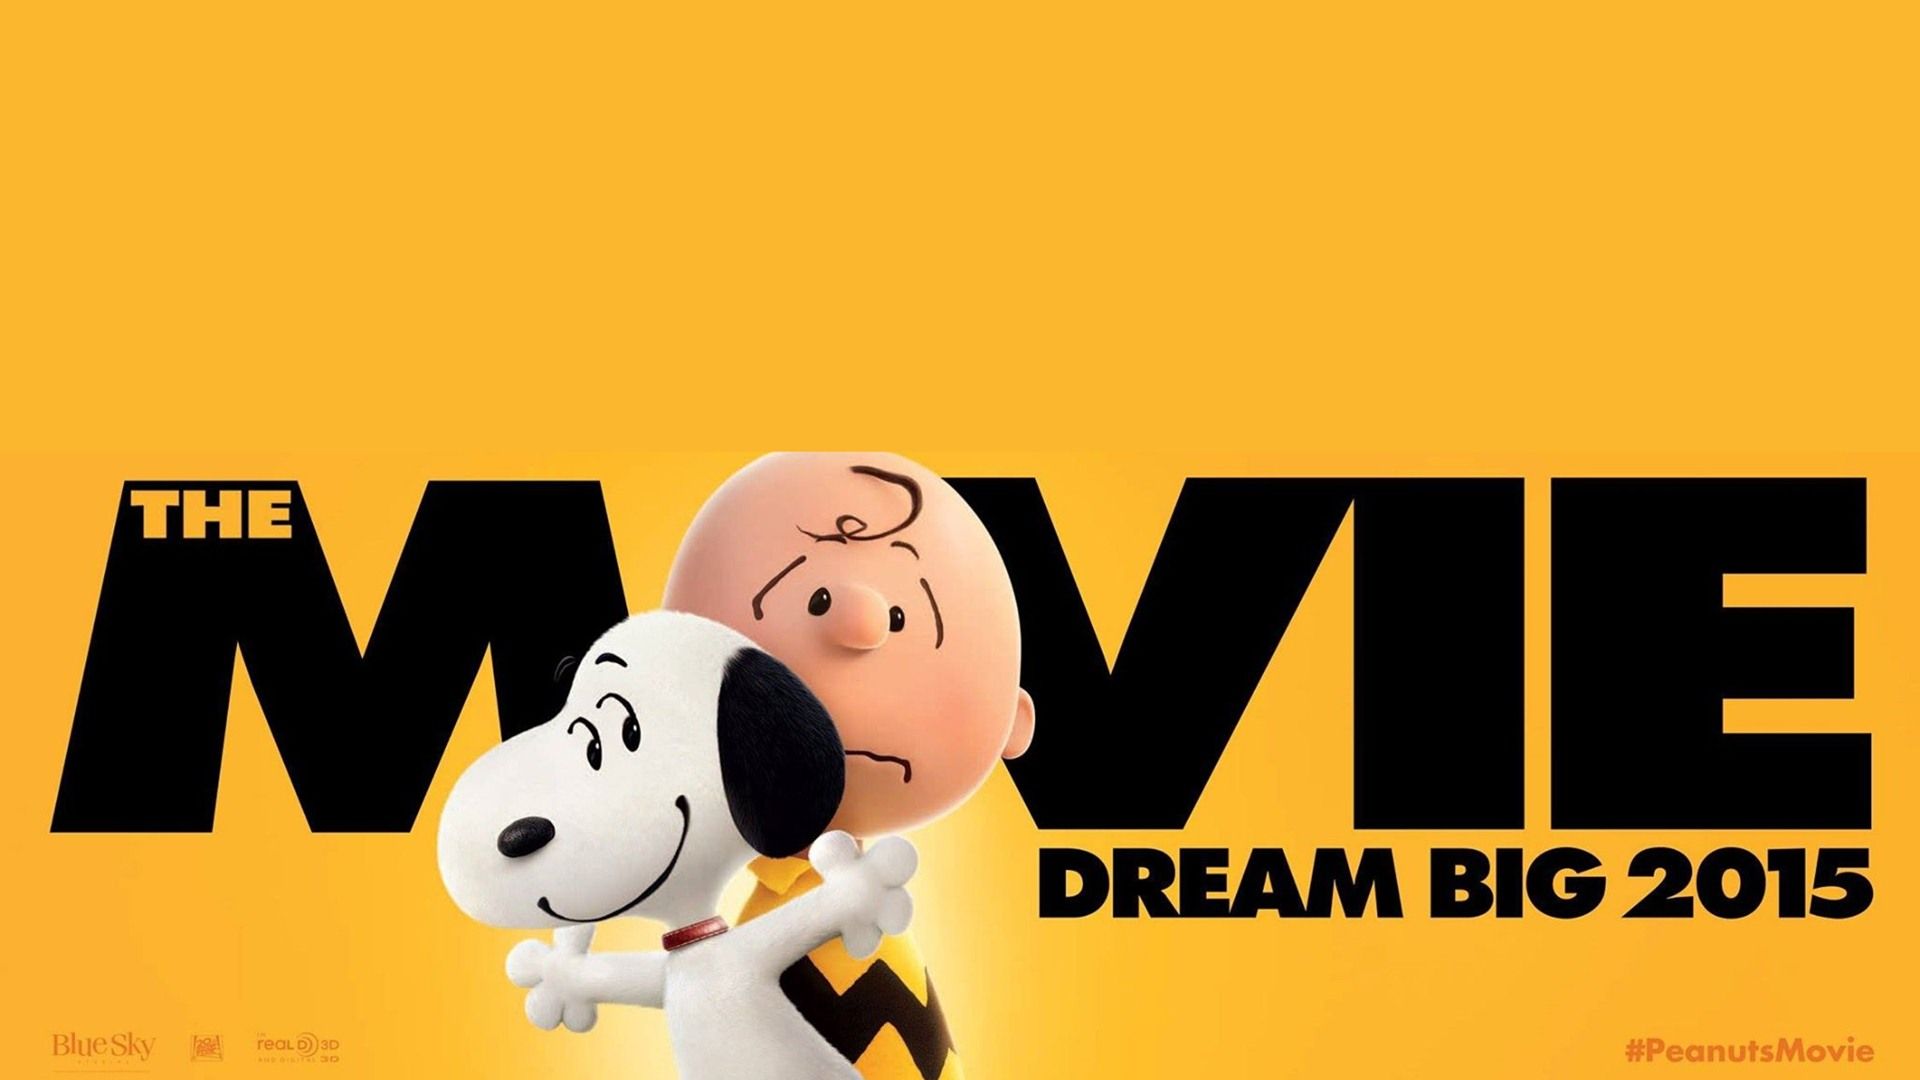 Gallery for - charlie brown and snoopy wallpaper